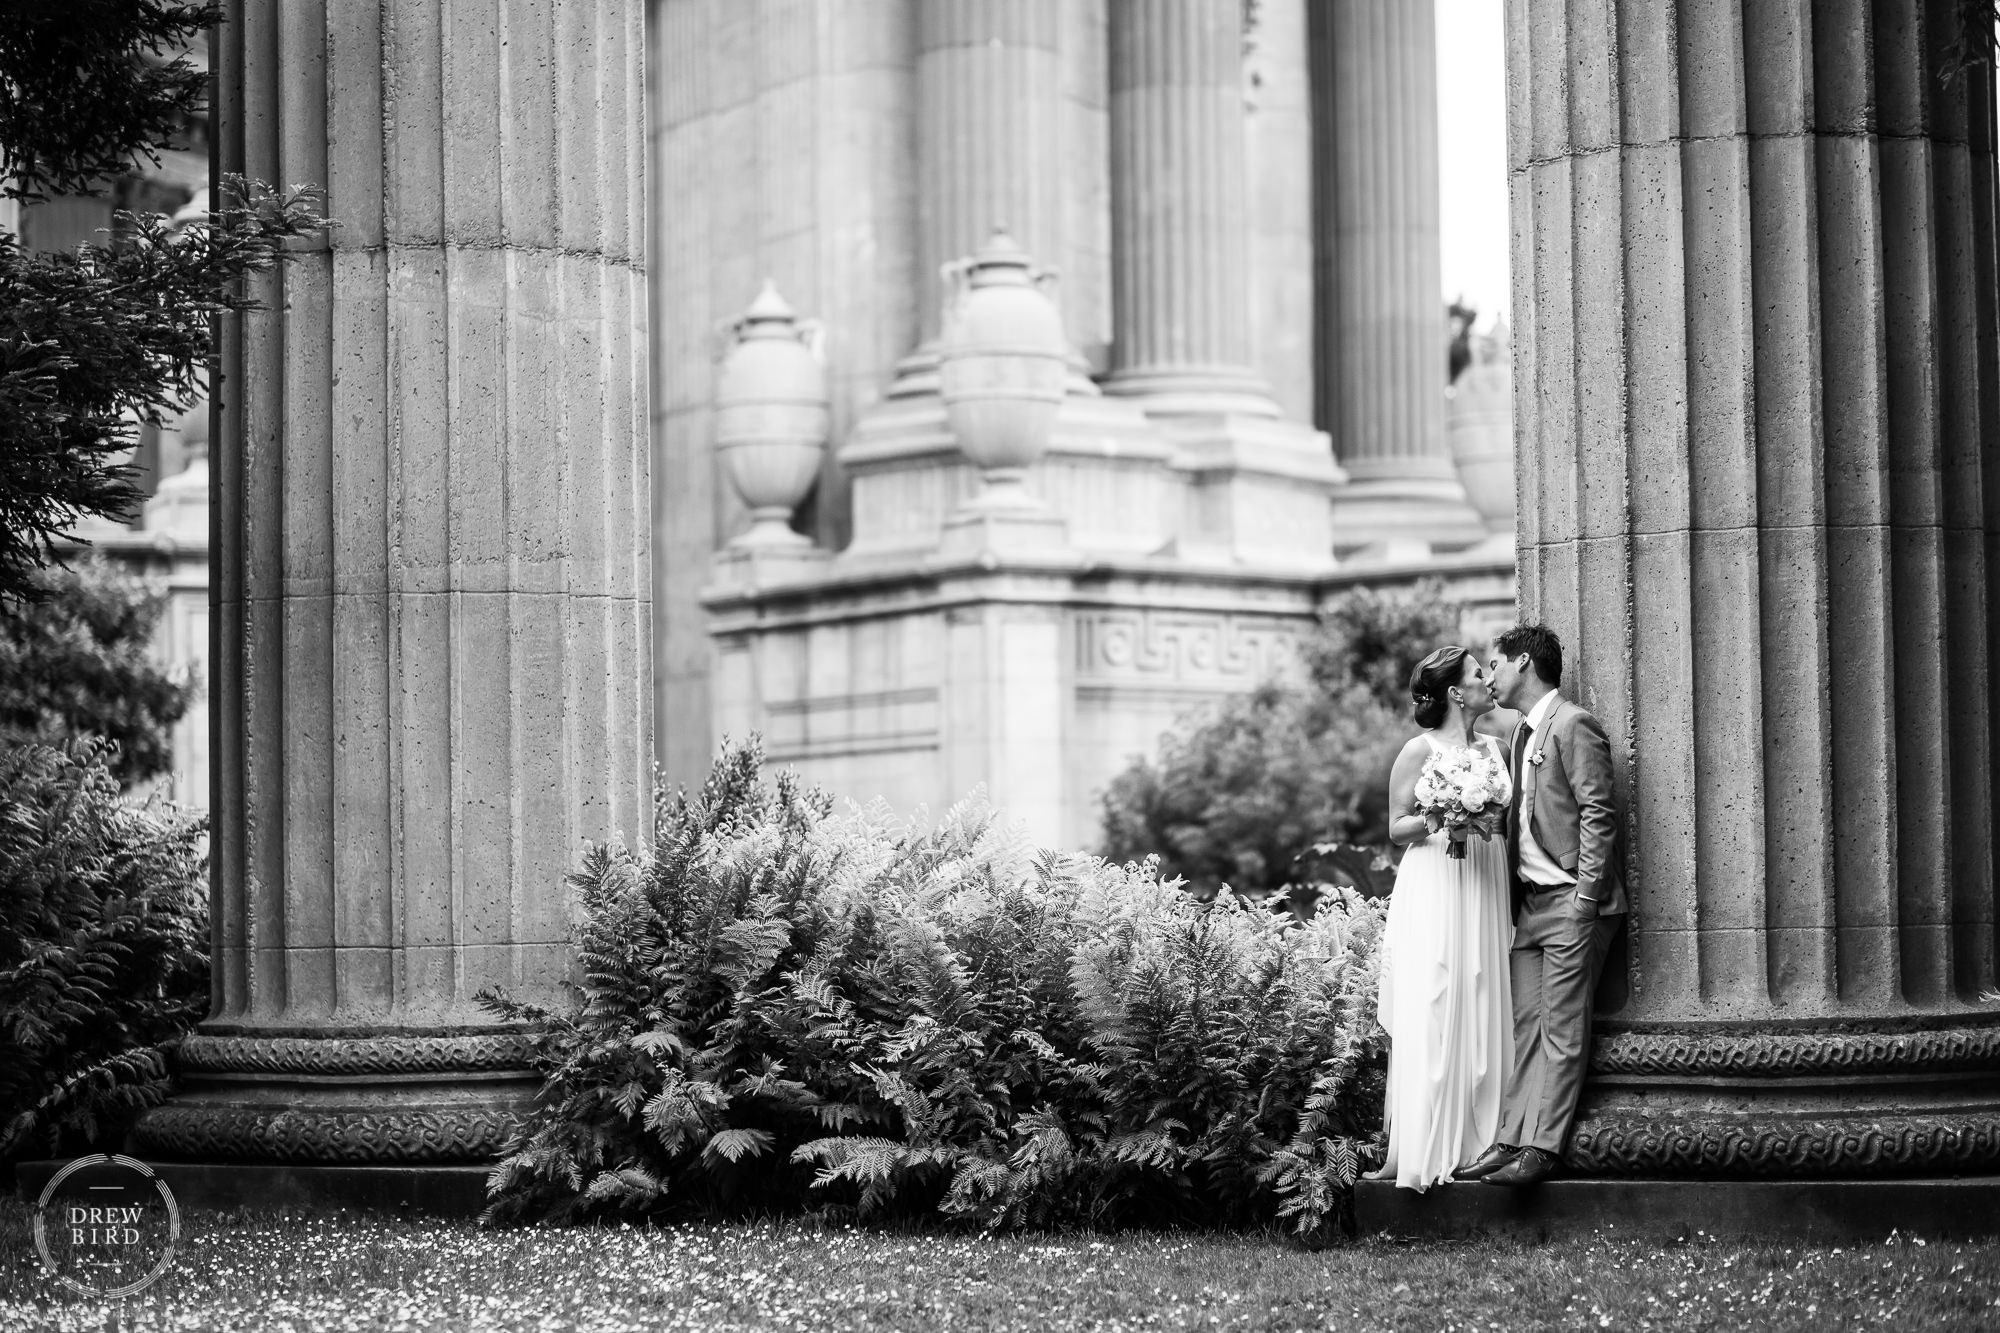 Bride and groom kissing at the palace of fine arts a wedding venue in San Francisco.